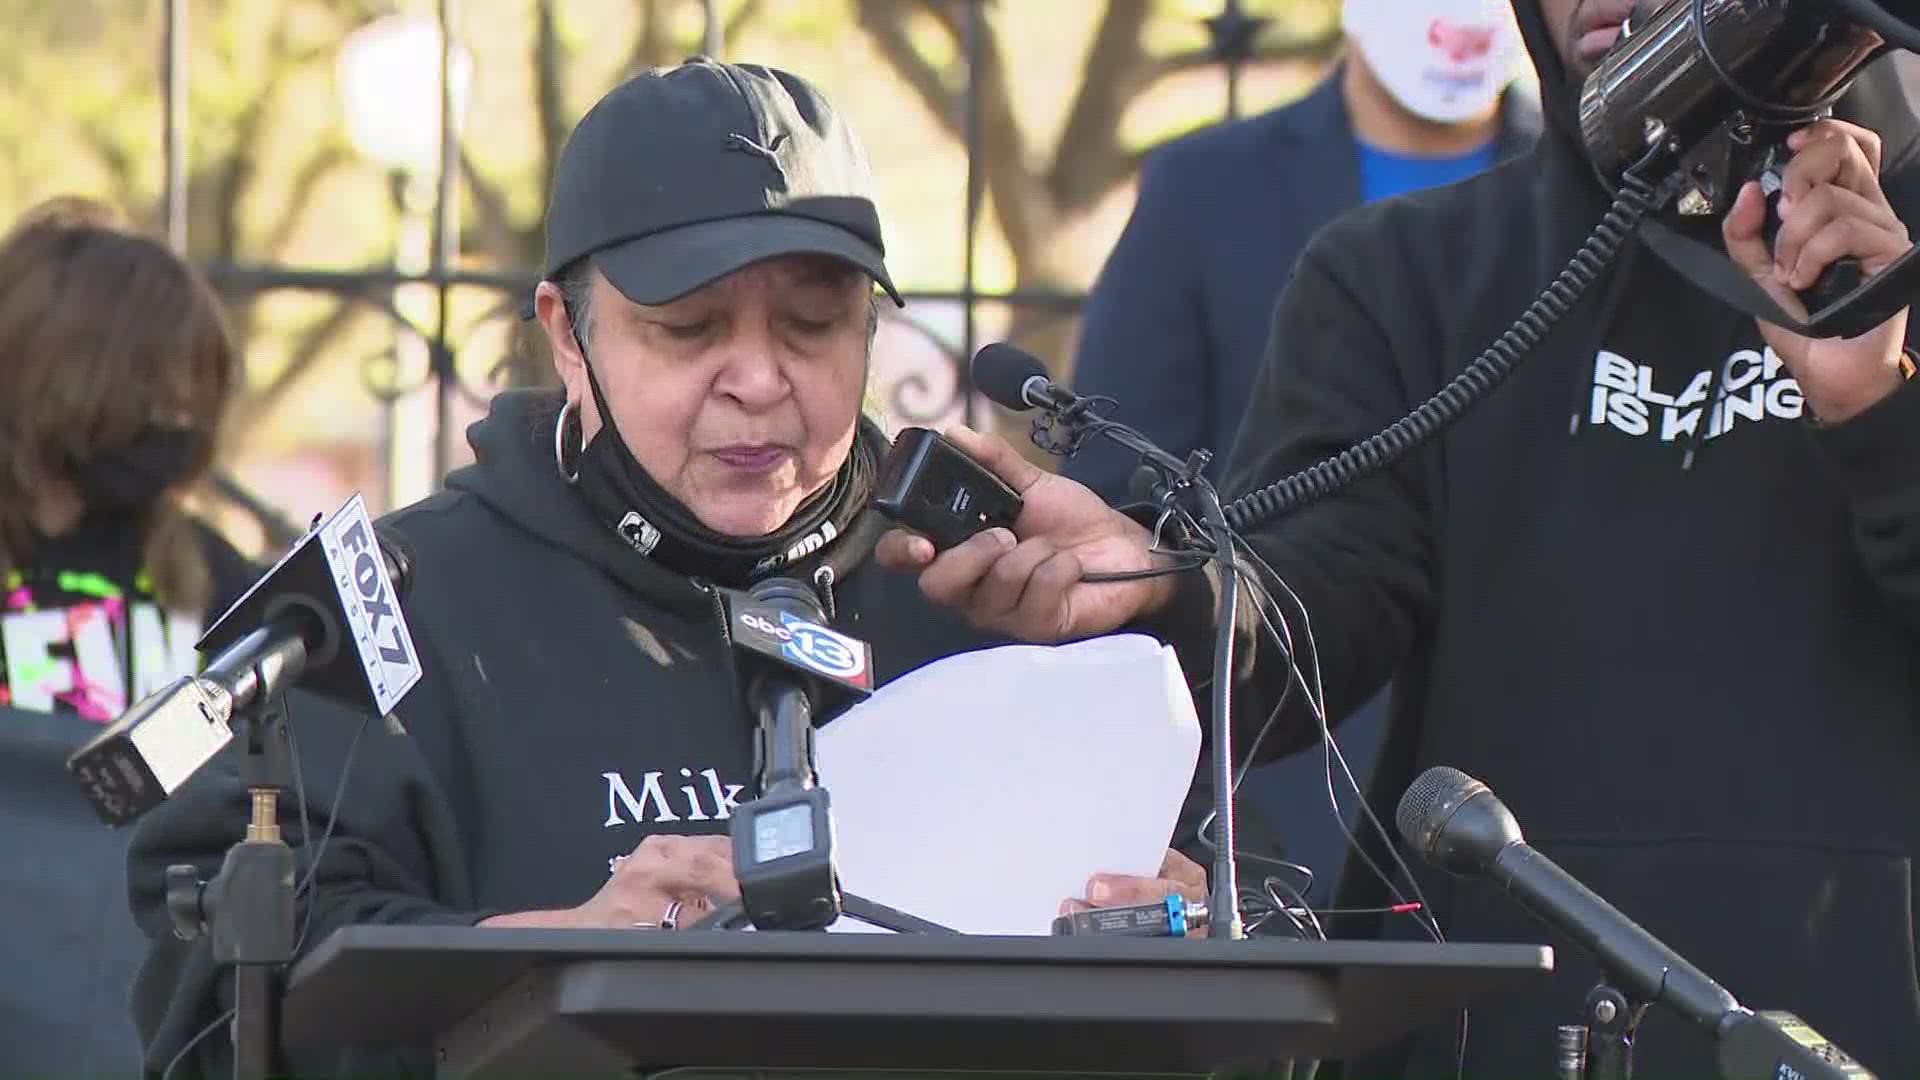 Protesters are urging Texas lawmakers to pass police reform bills. Watch the full March 25 rally.